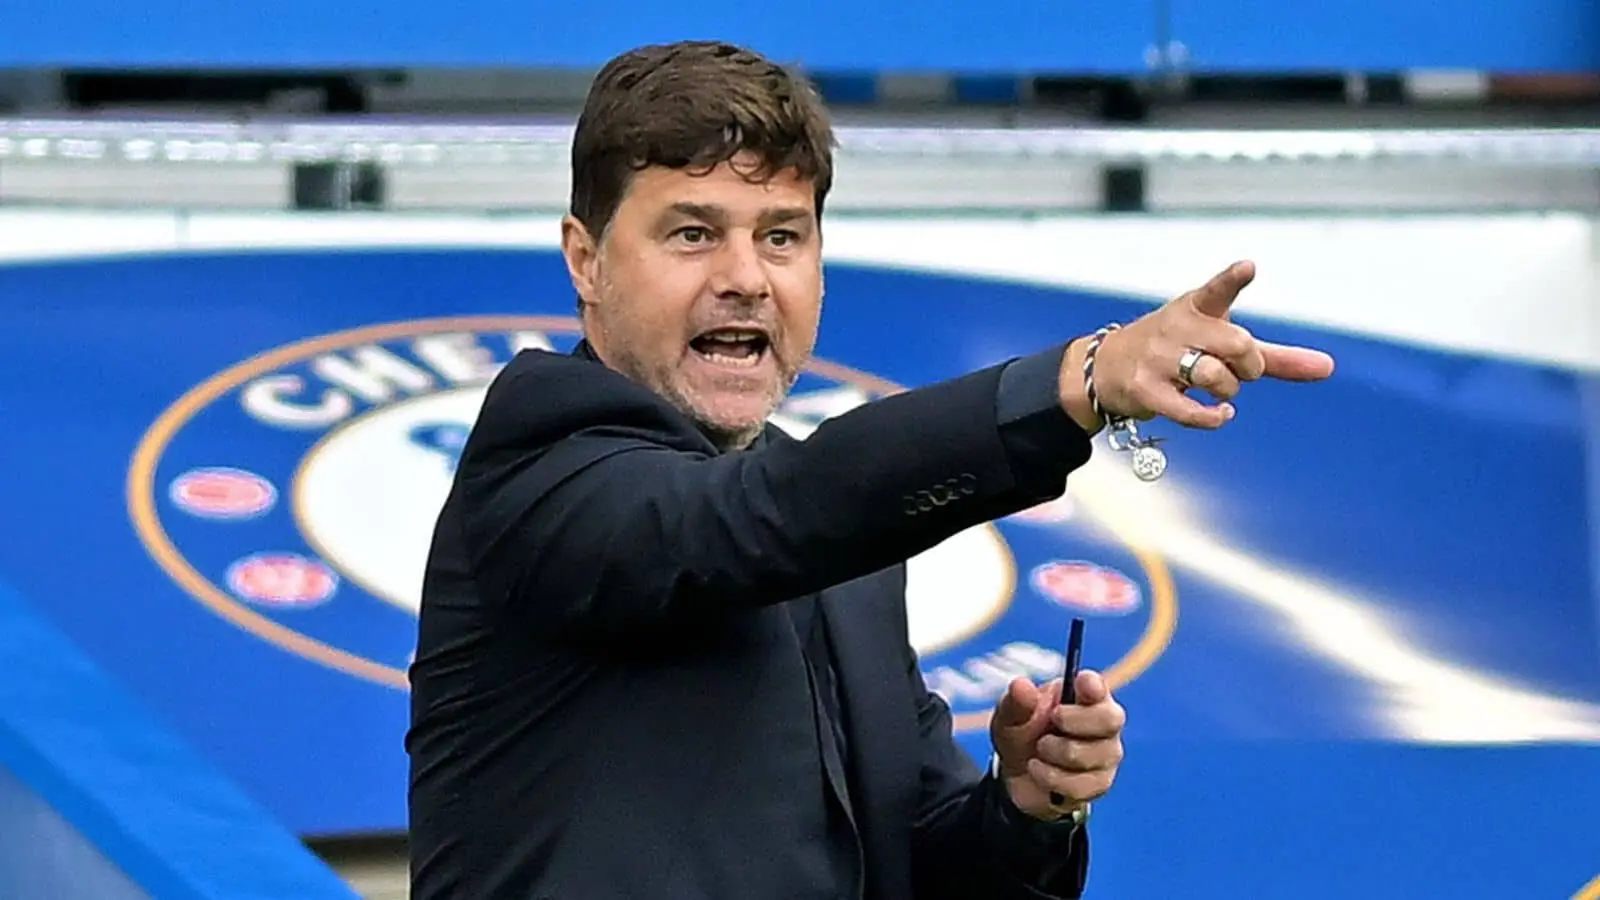 EPL: An important victory – Pochettino on Chelsea’s 3-2 win at Nottingham